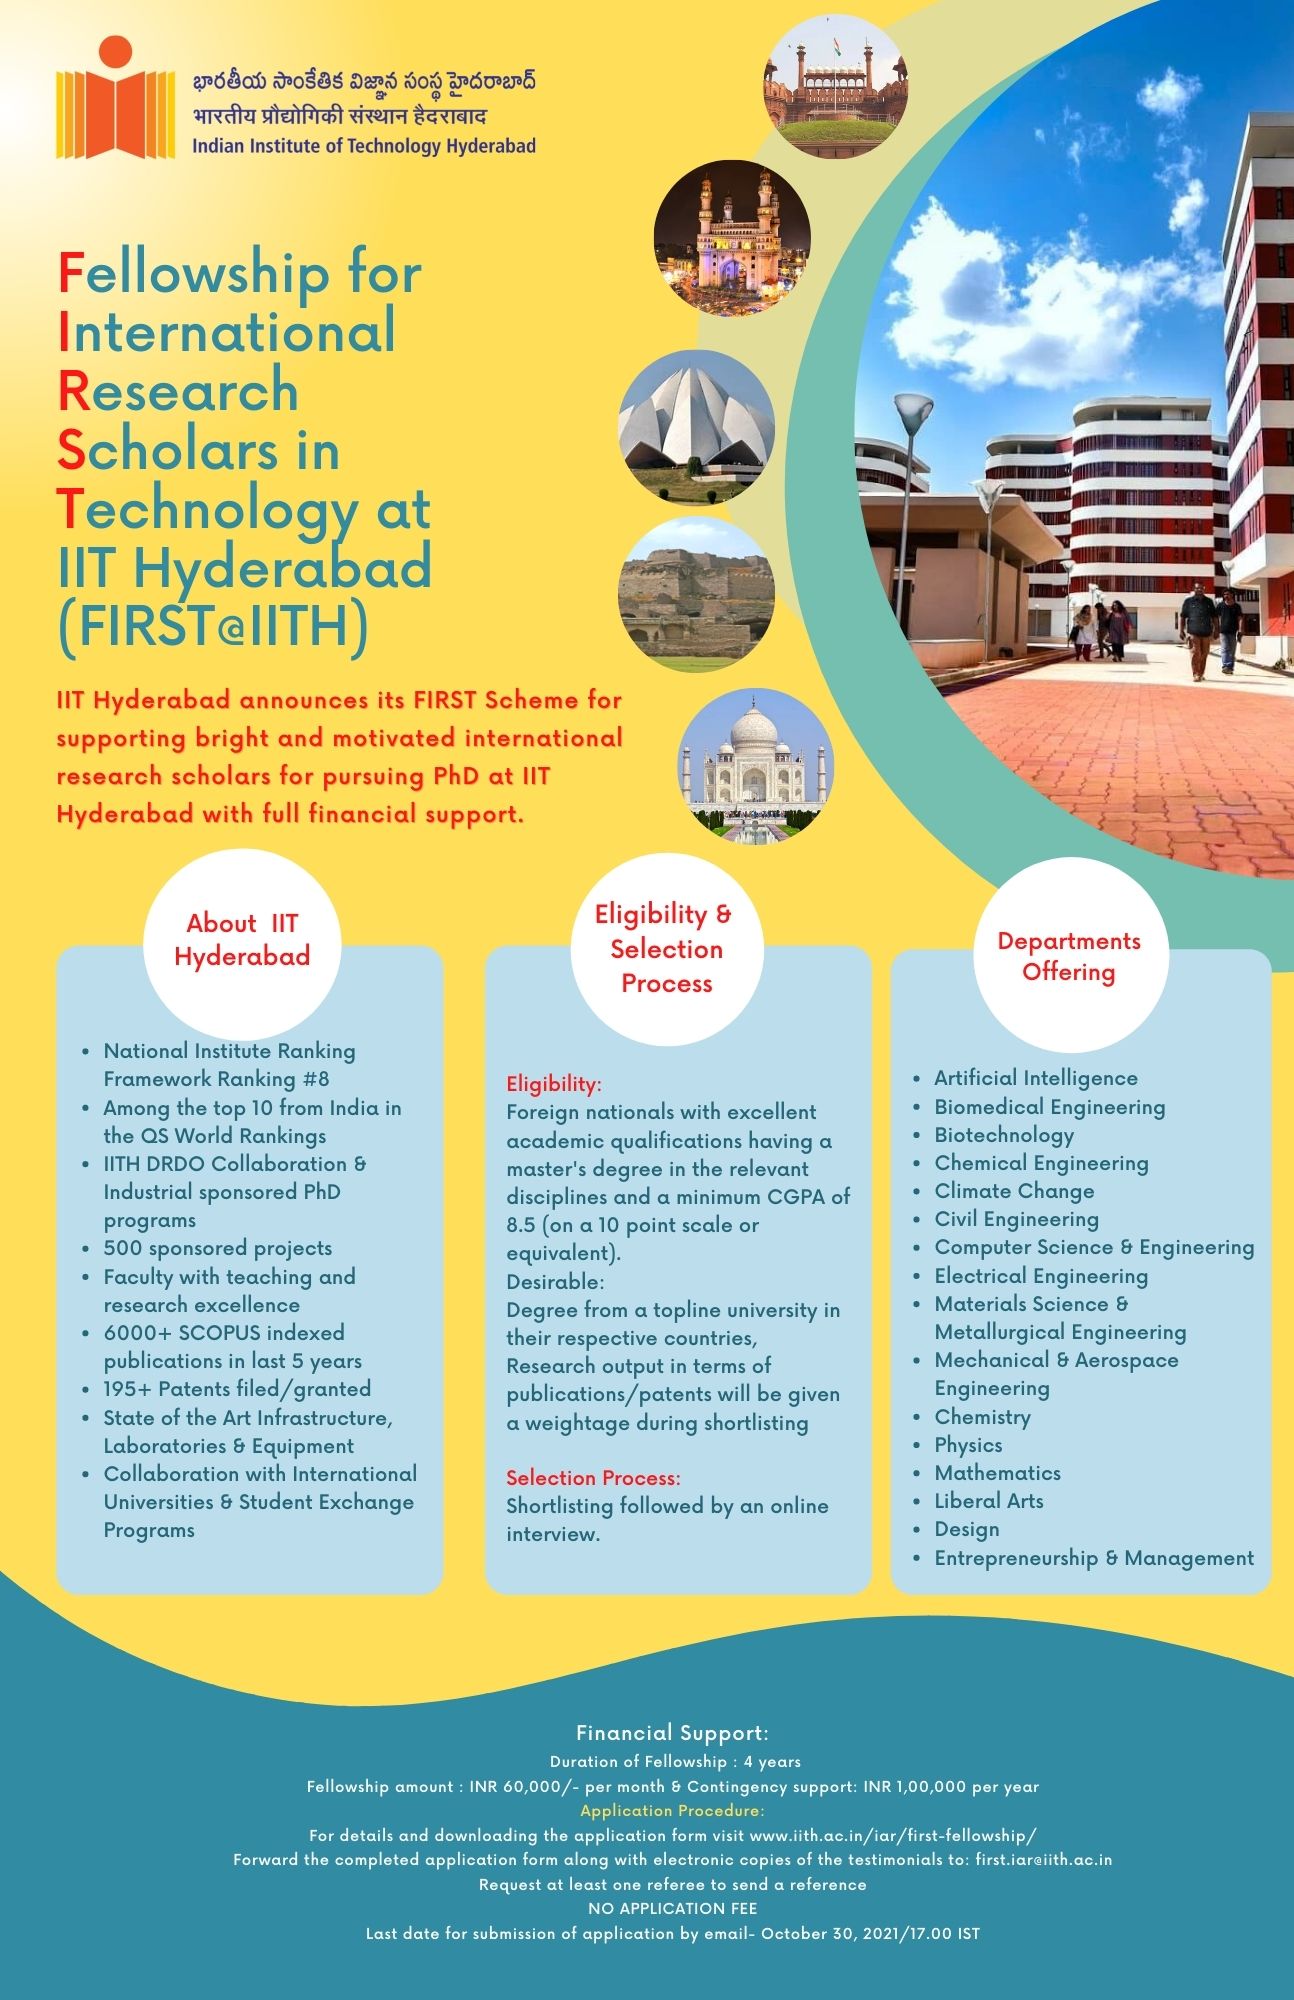 IIT Hyderabad announces the second round (for admission for the January-May 2022 academic semester) of the Fellowship for International Research Scholars in Technology (FIRST@IITH) scheme